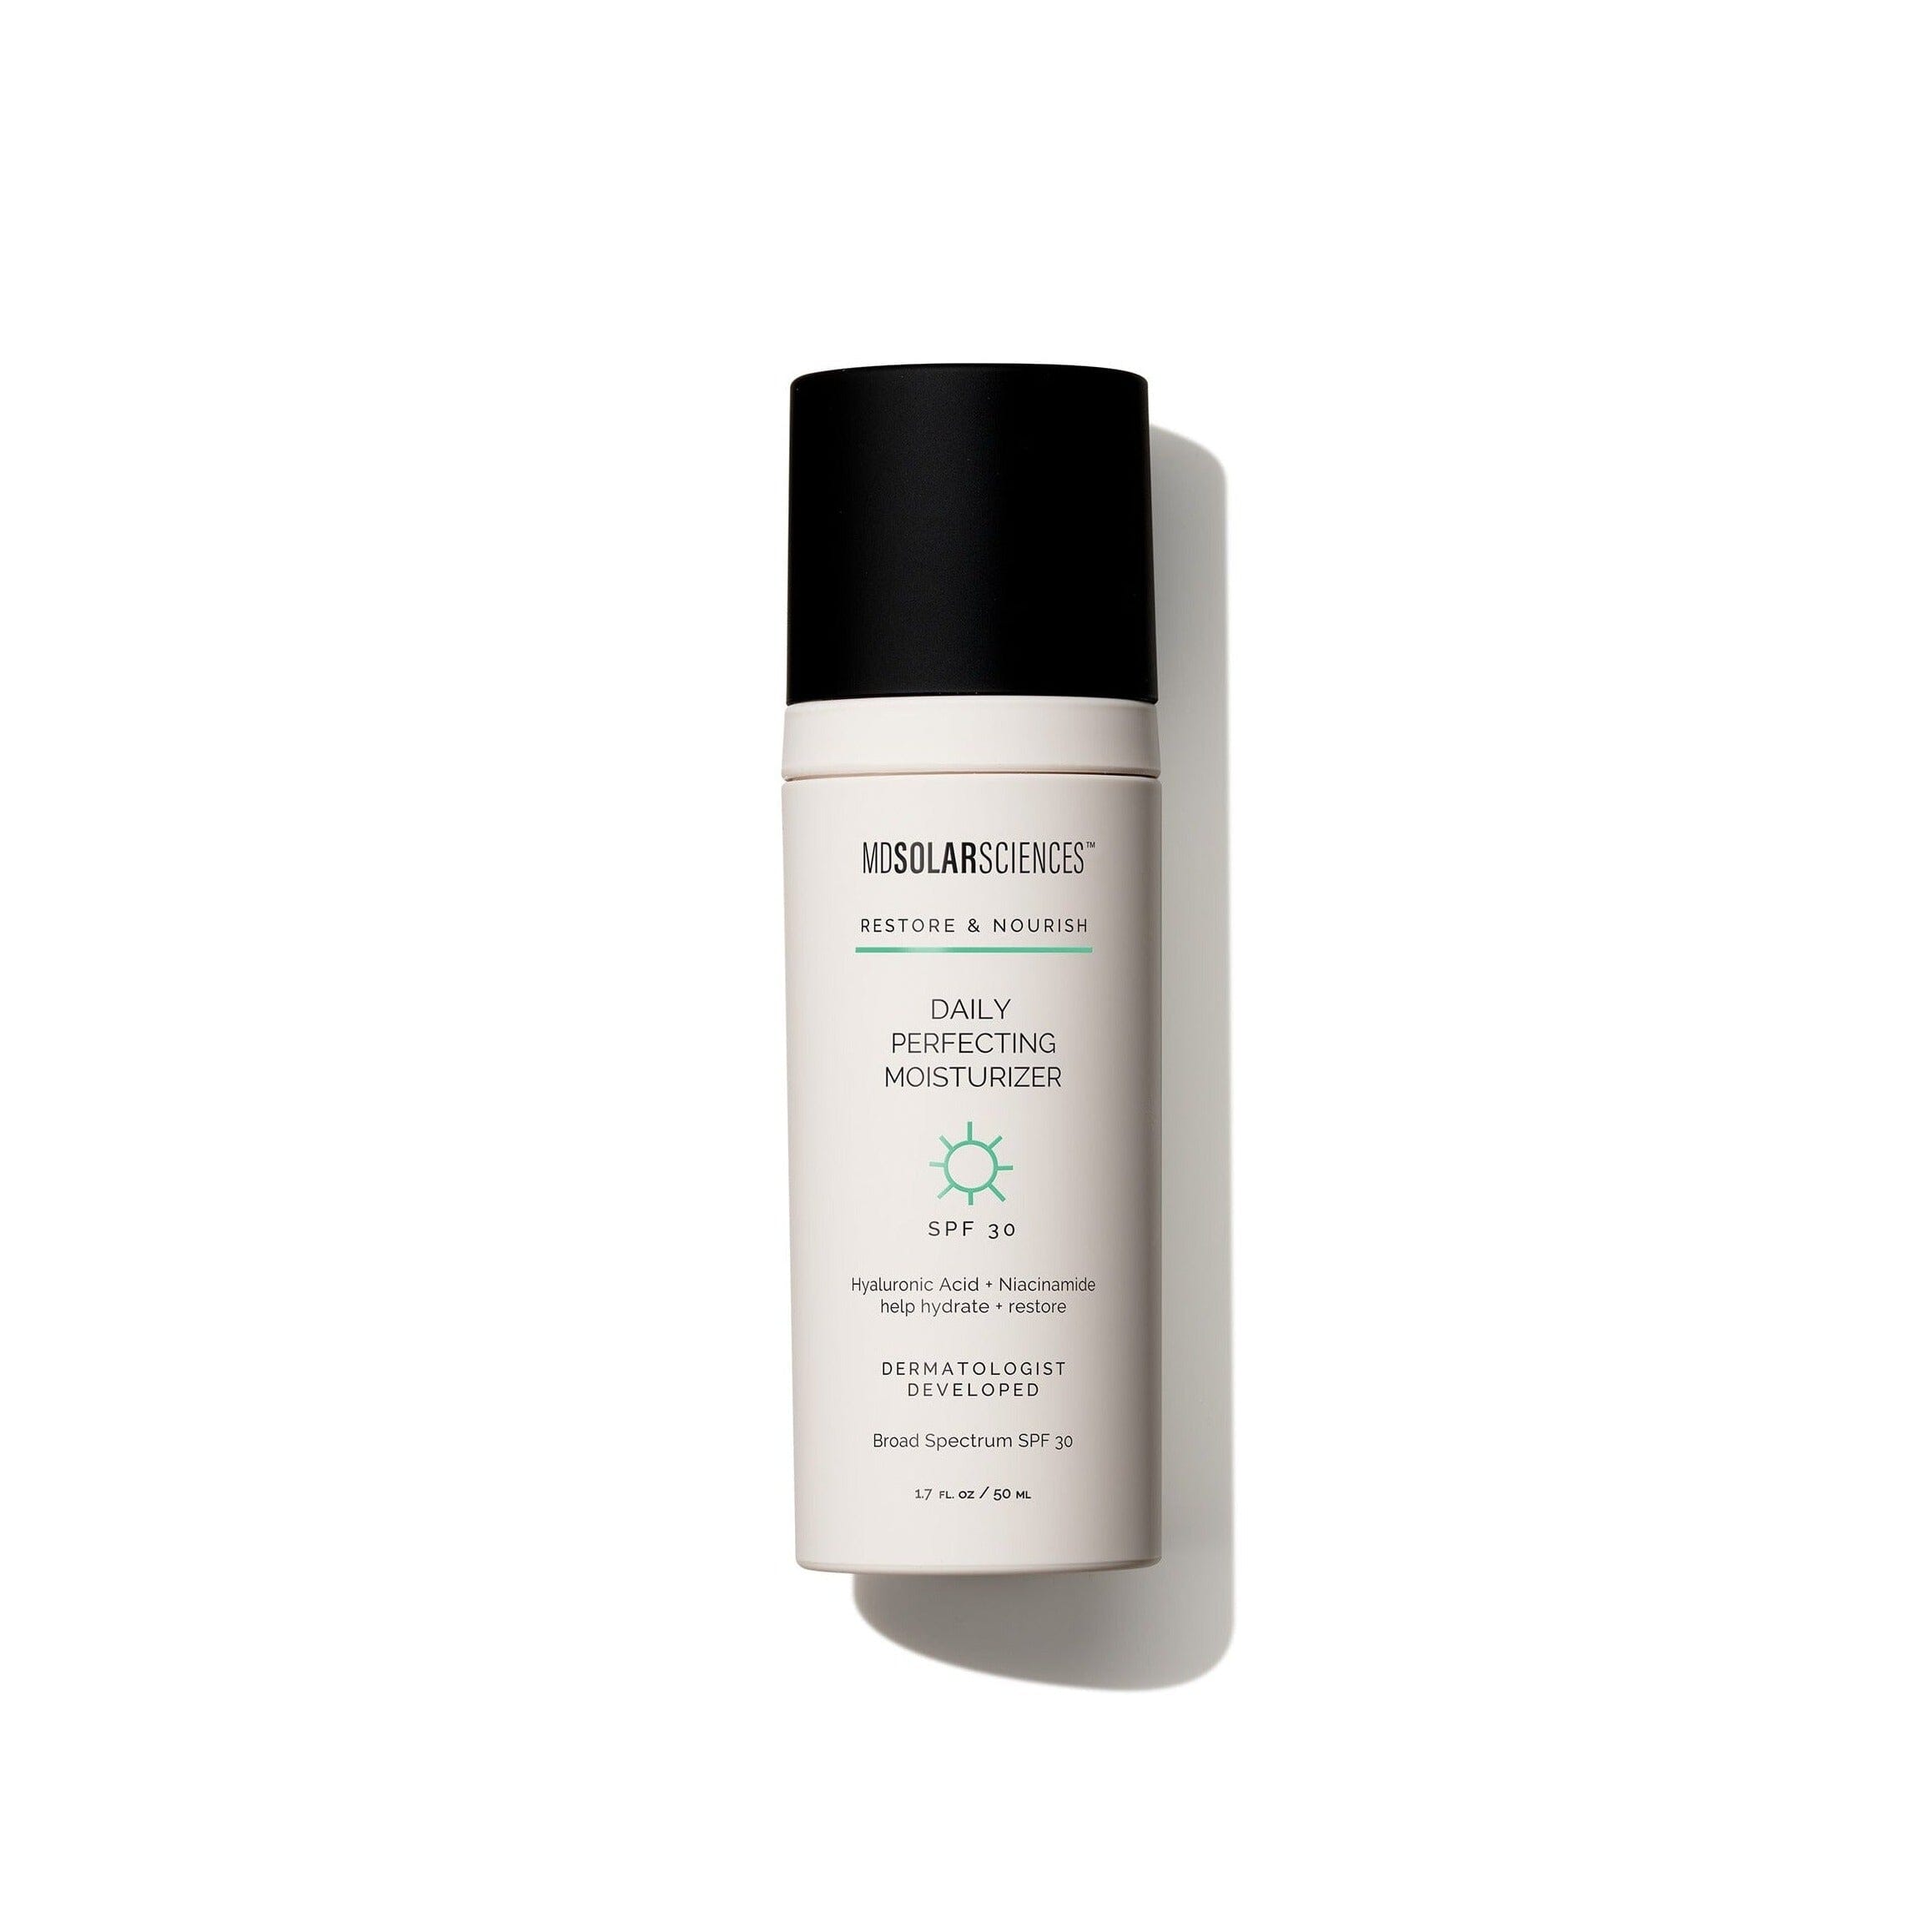 MDSolarSciences Daily Perfecting Moisturizer SPF 30 Sunscreen MDSolarSciences 1.7 oz. Shop at Exclusive Beauty Club